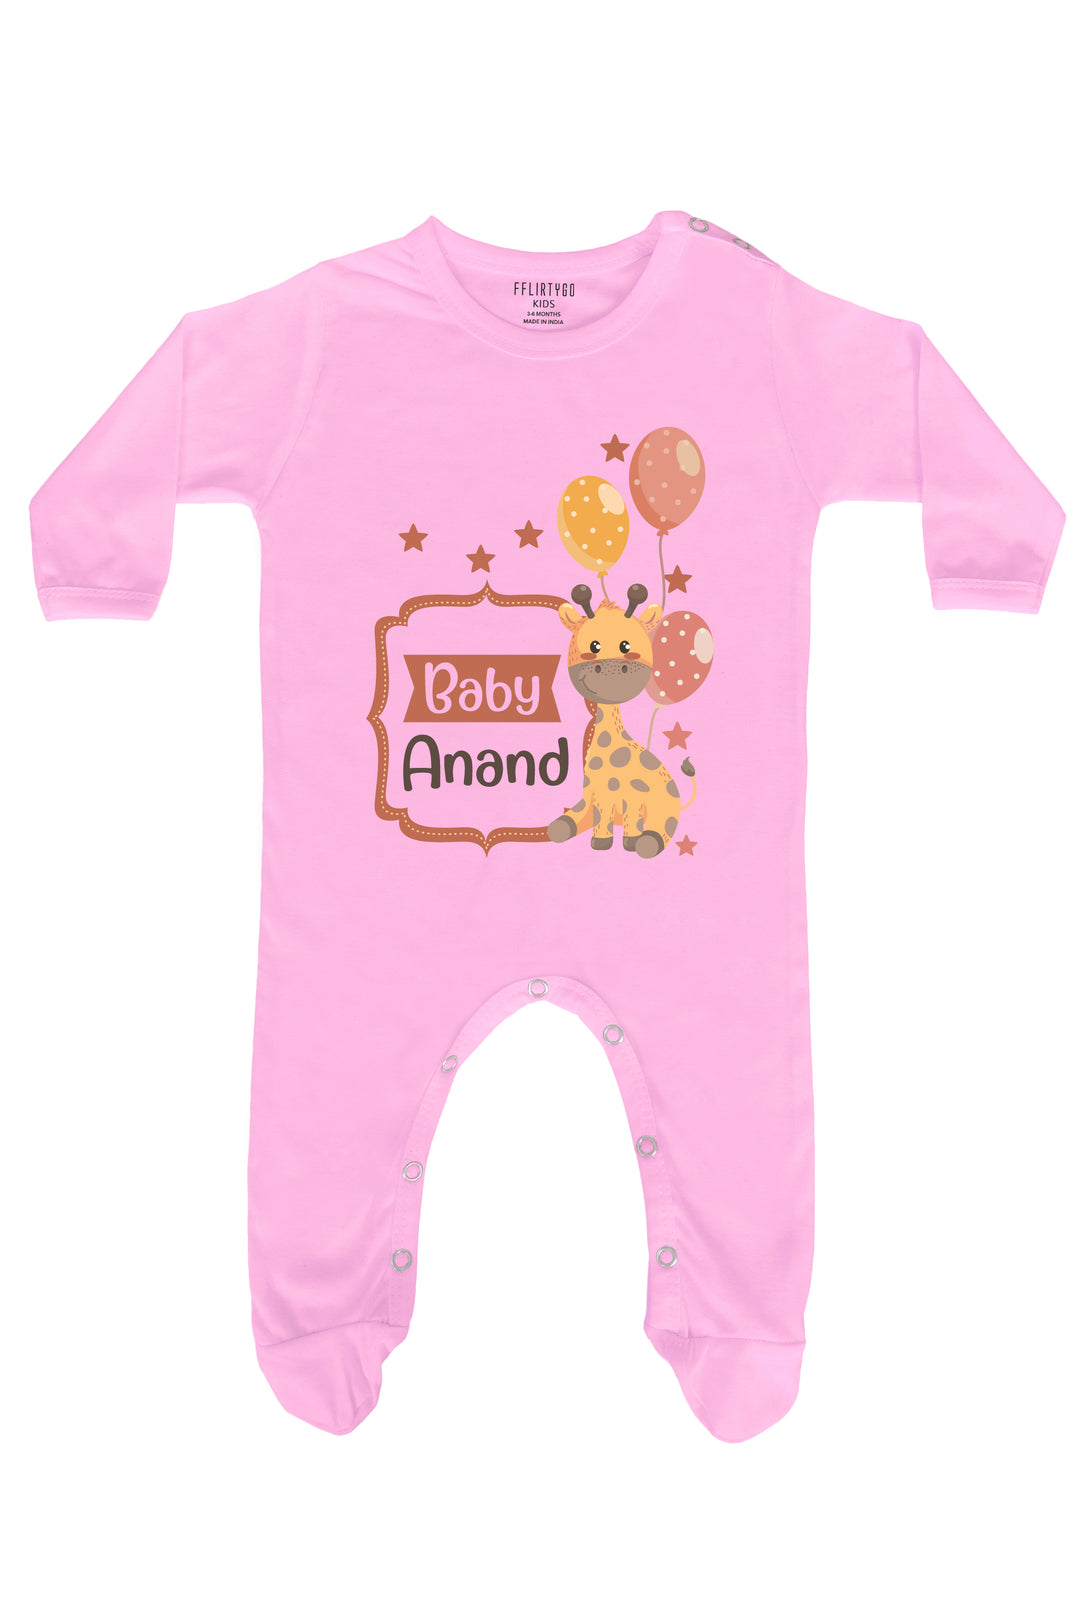 Baby Custom Surname Baby Romper | Onesies With Character